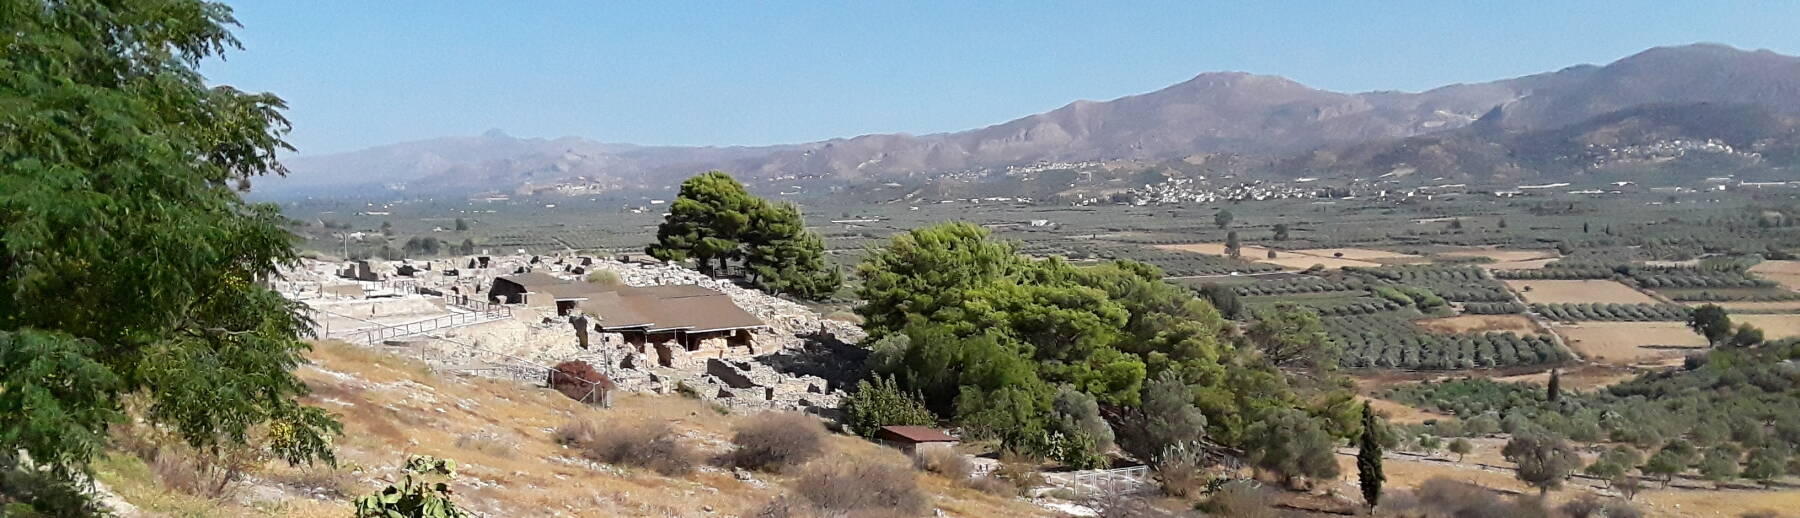 The Phaistos palace on its outcropping above the Messara plain.